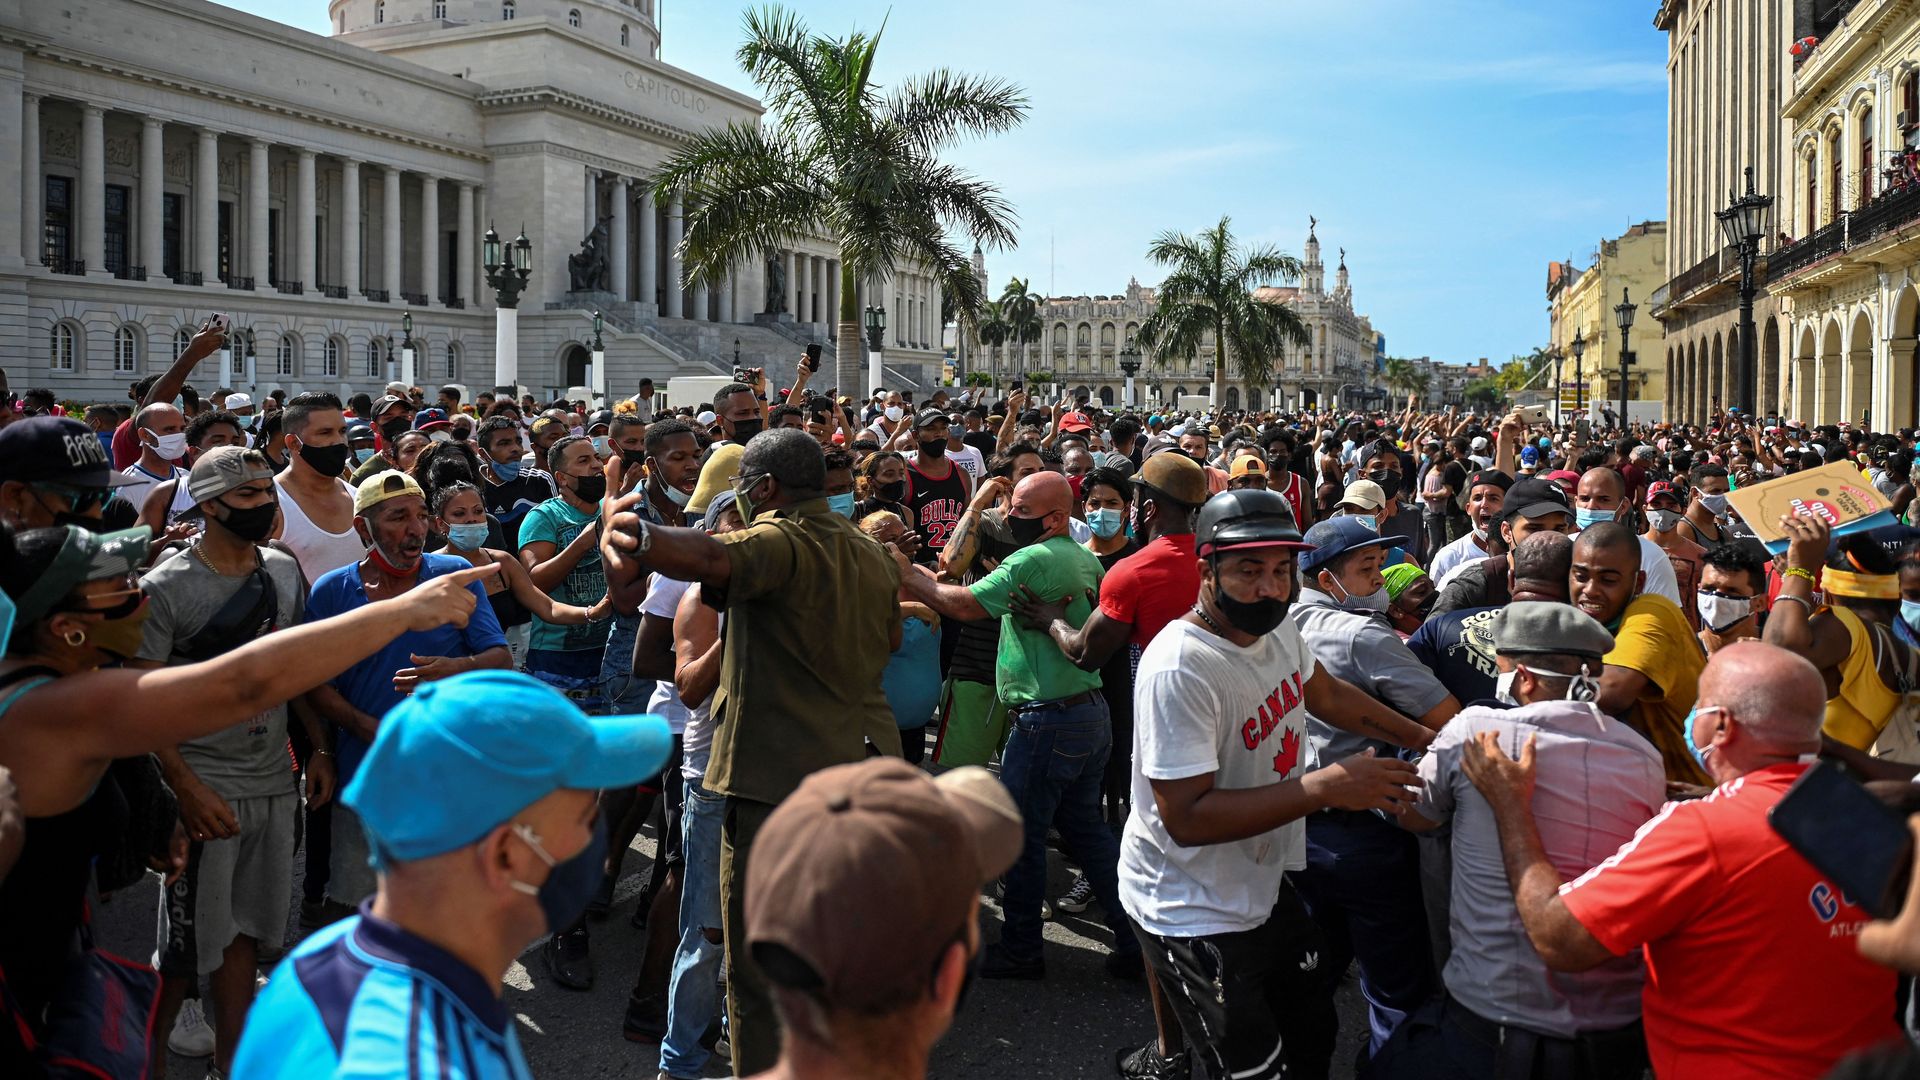  People take part in a demonstration against the government of Cuban President Miguel Diaz-Canel in Havana, on July 11